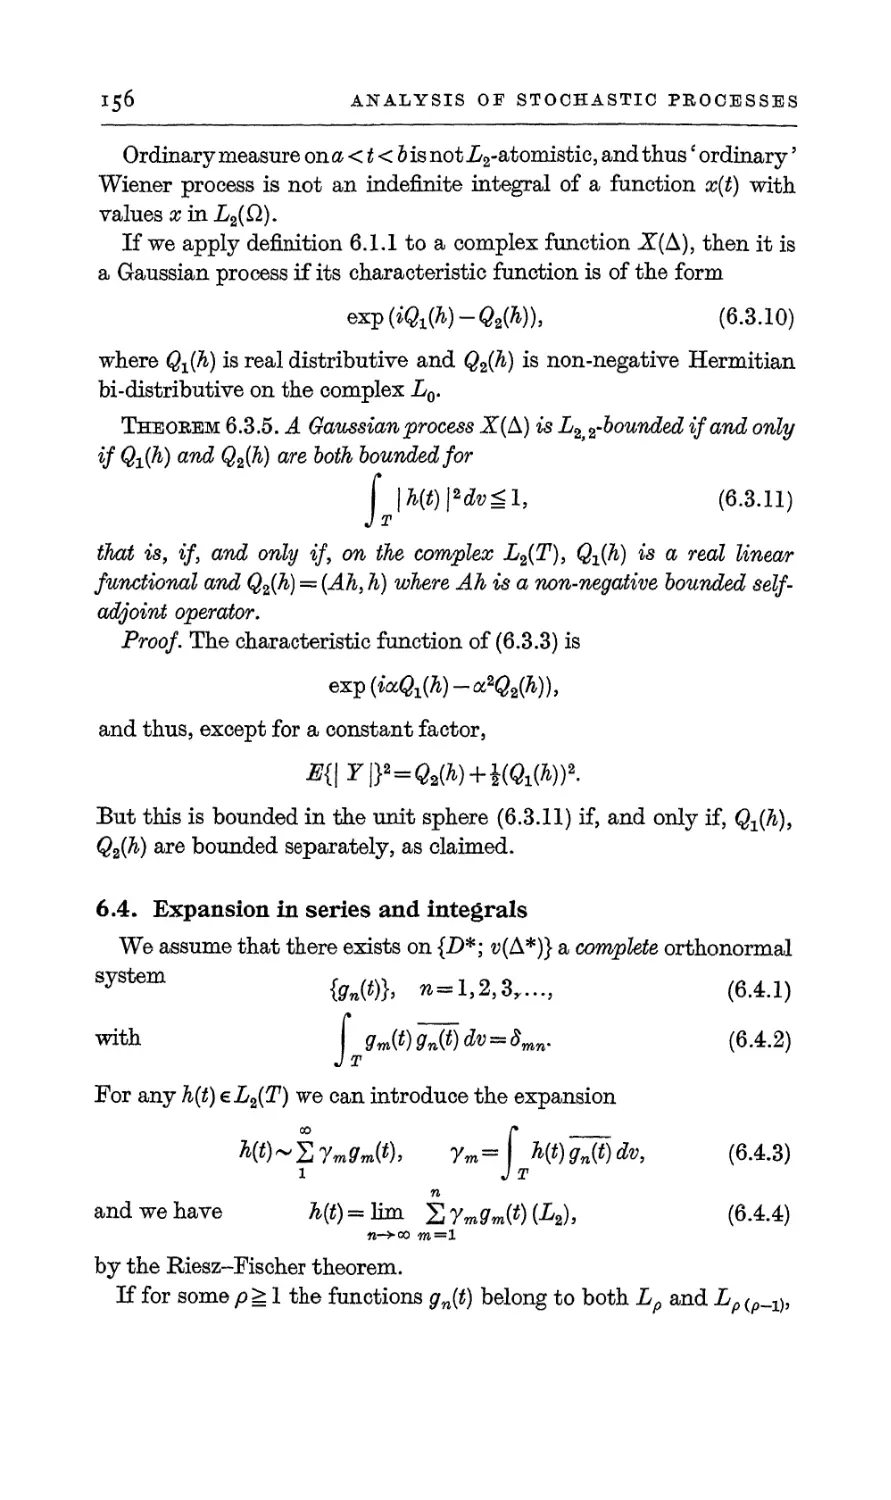 6.4. Expansion in series and integrals